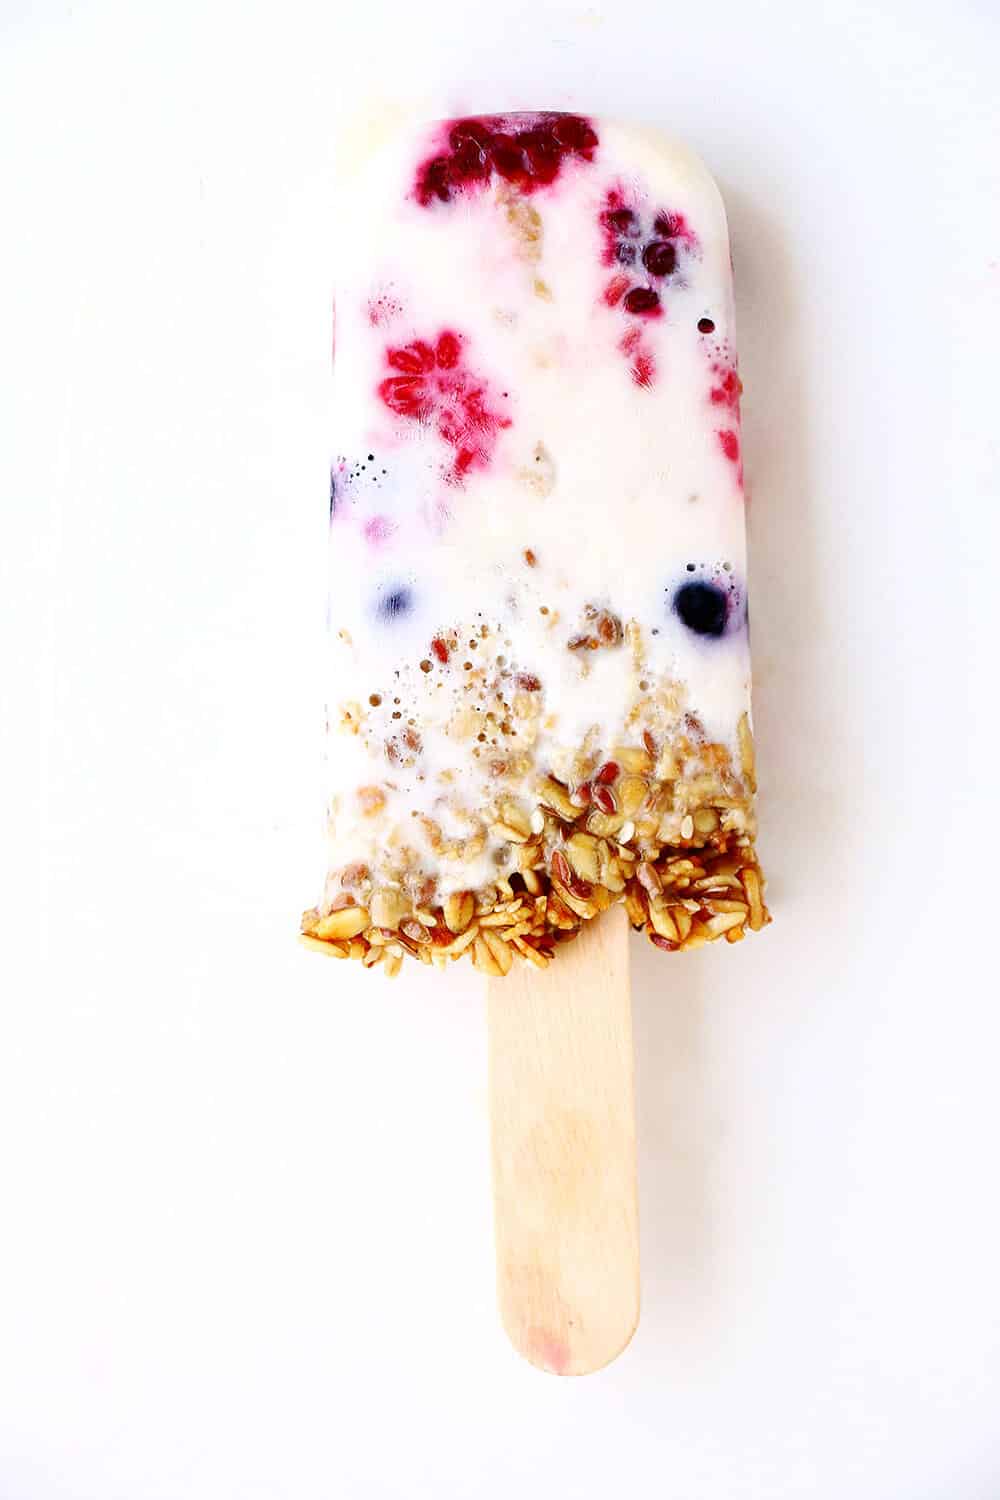 Breakfast popsicle with berry and granola.